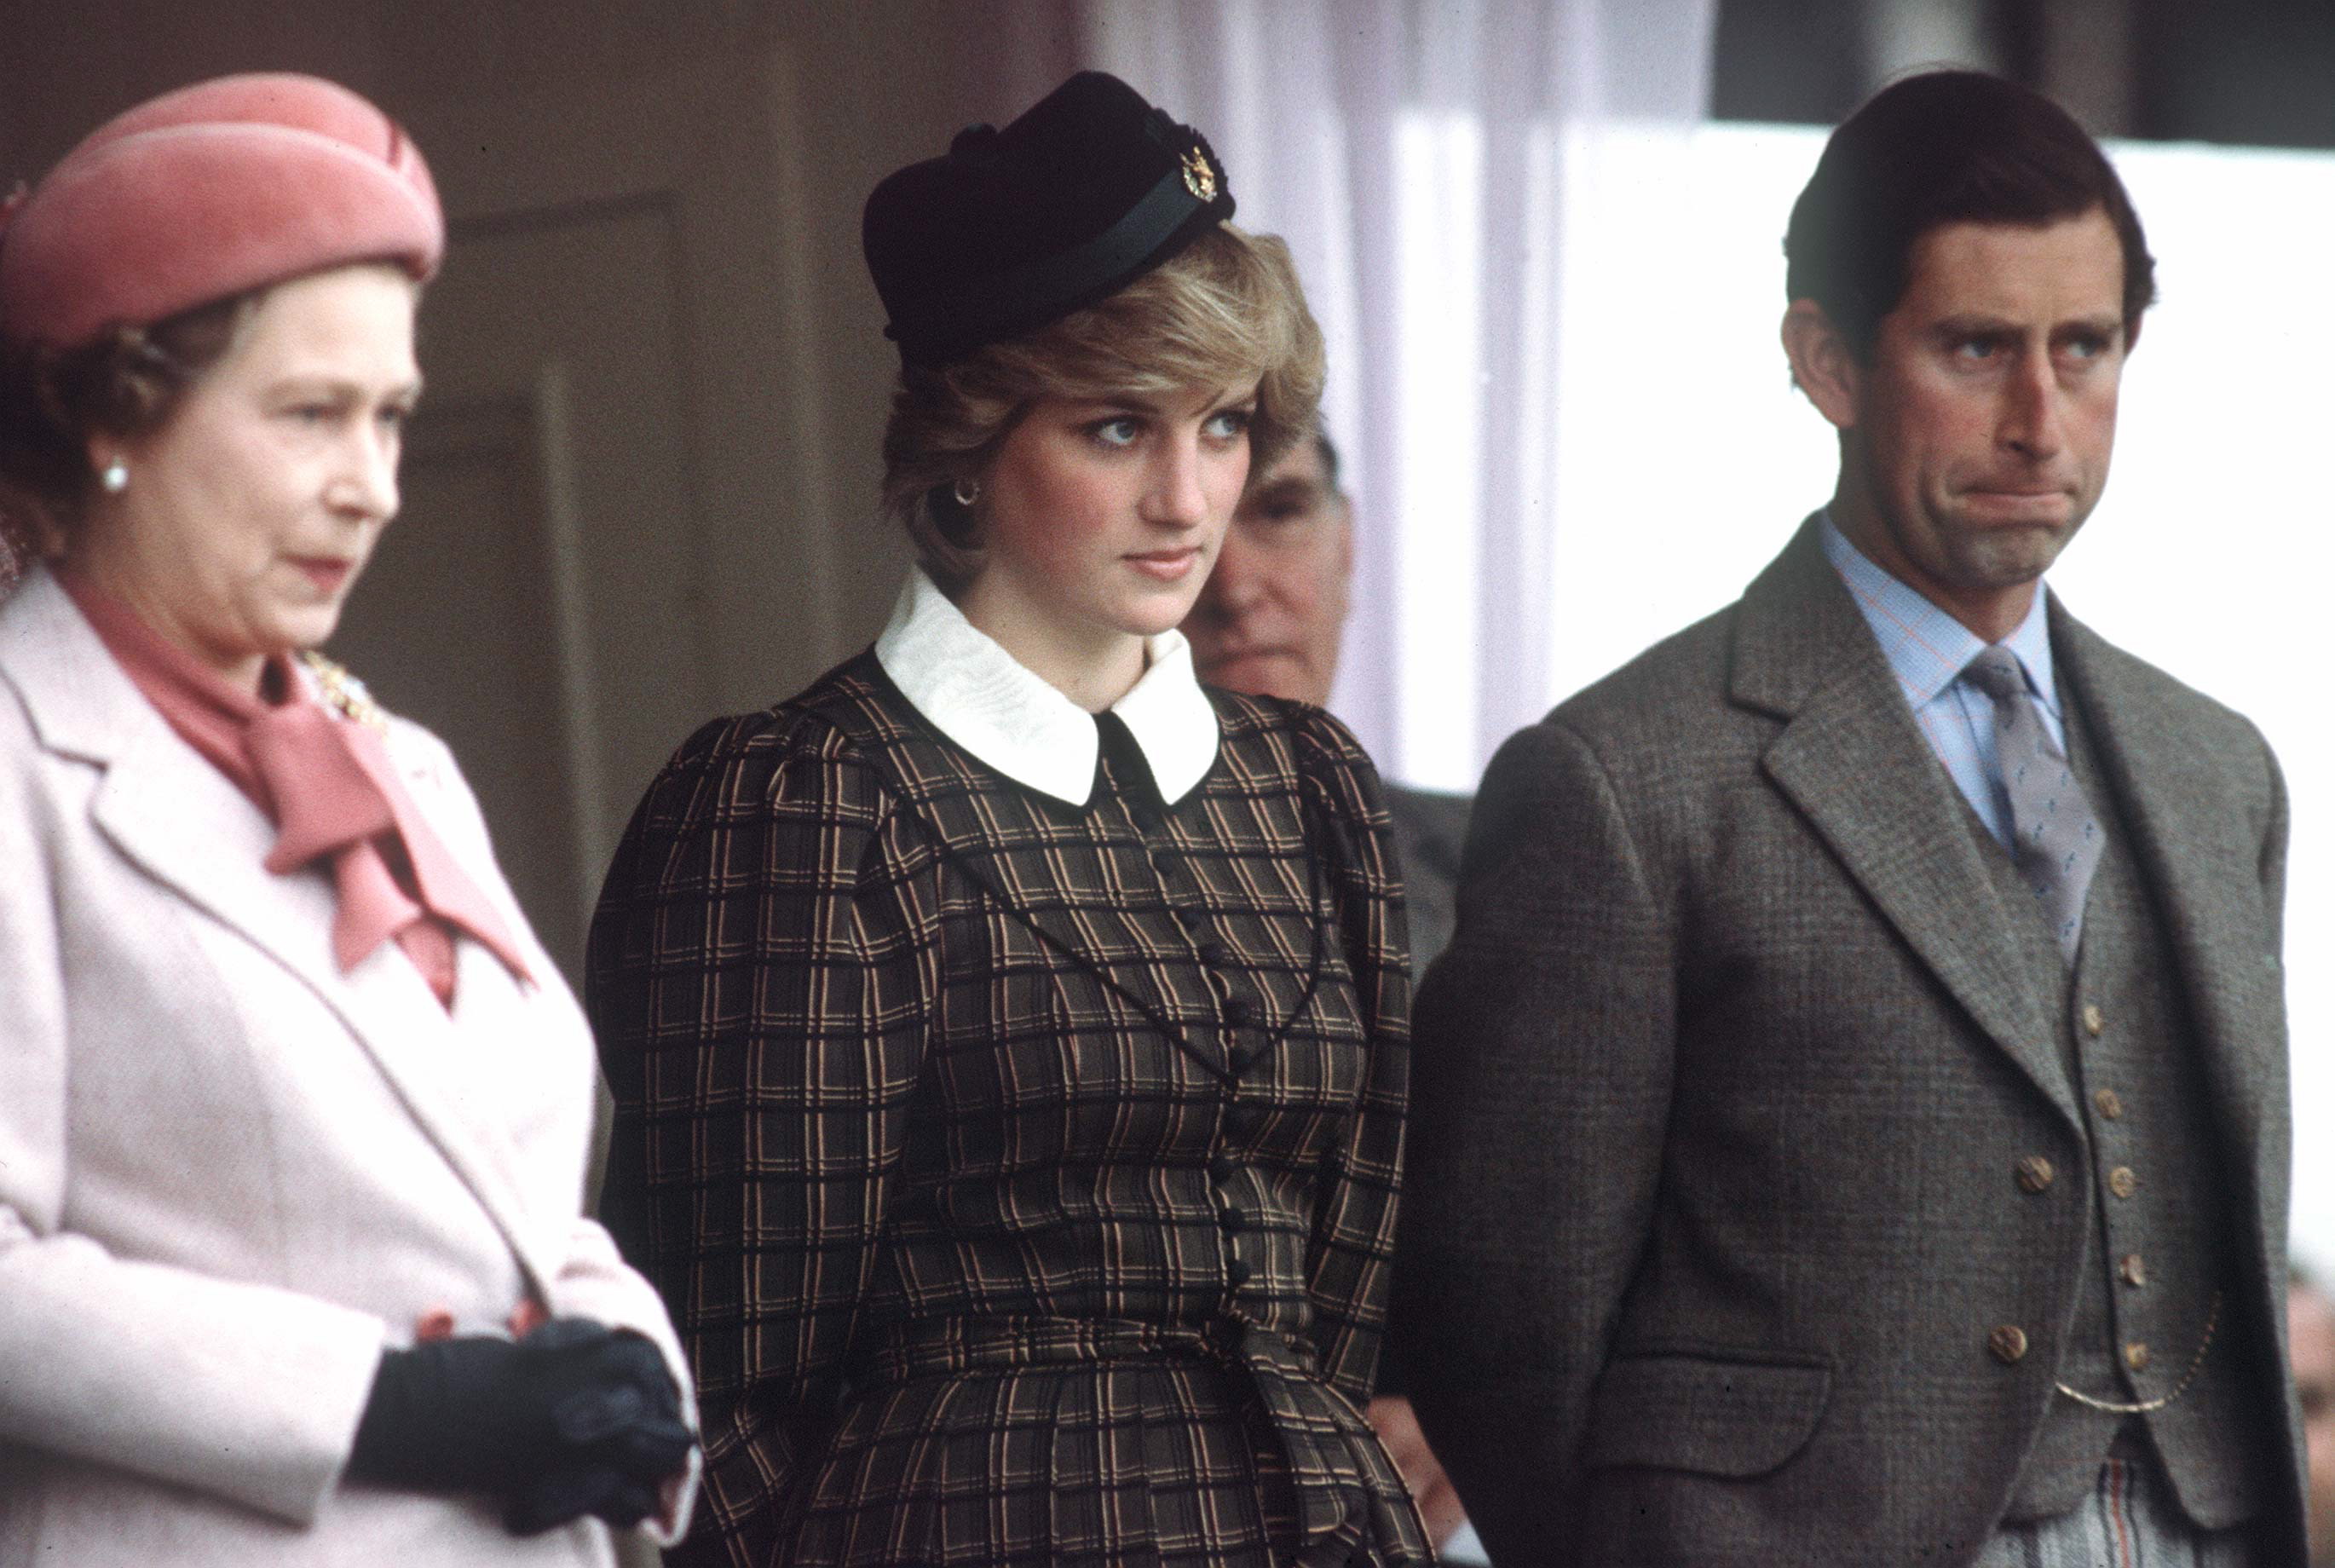 Queen Elizabeth Il, Princess Diana, and Prince Charles 